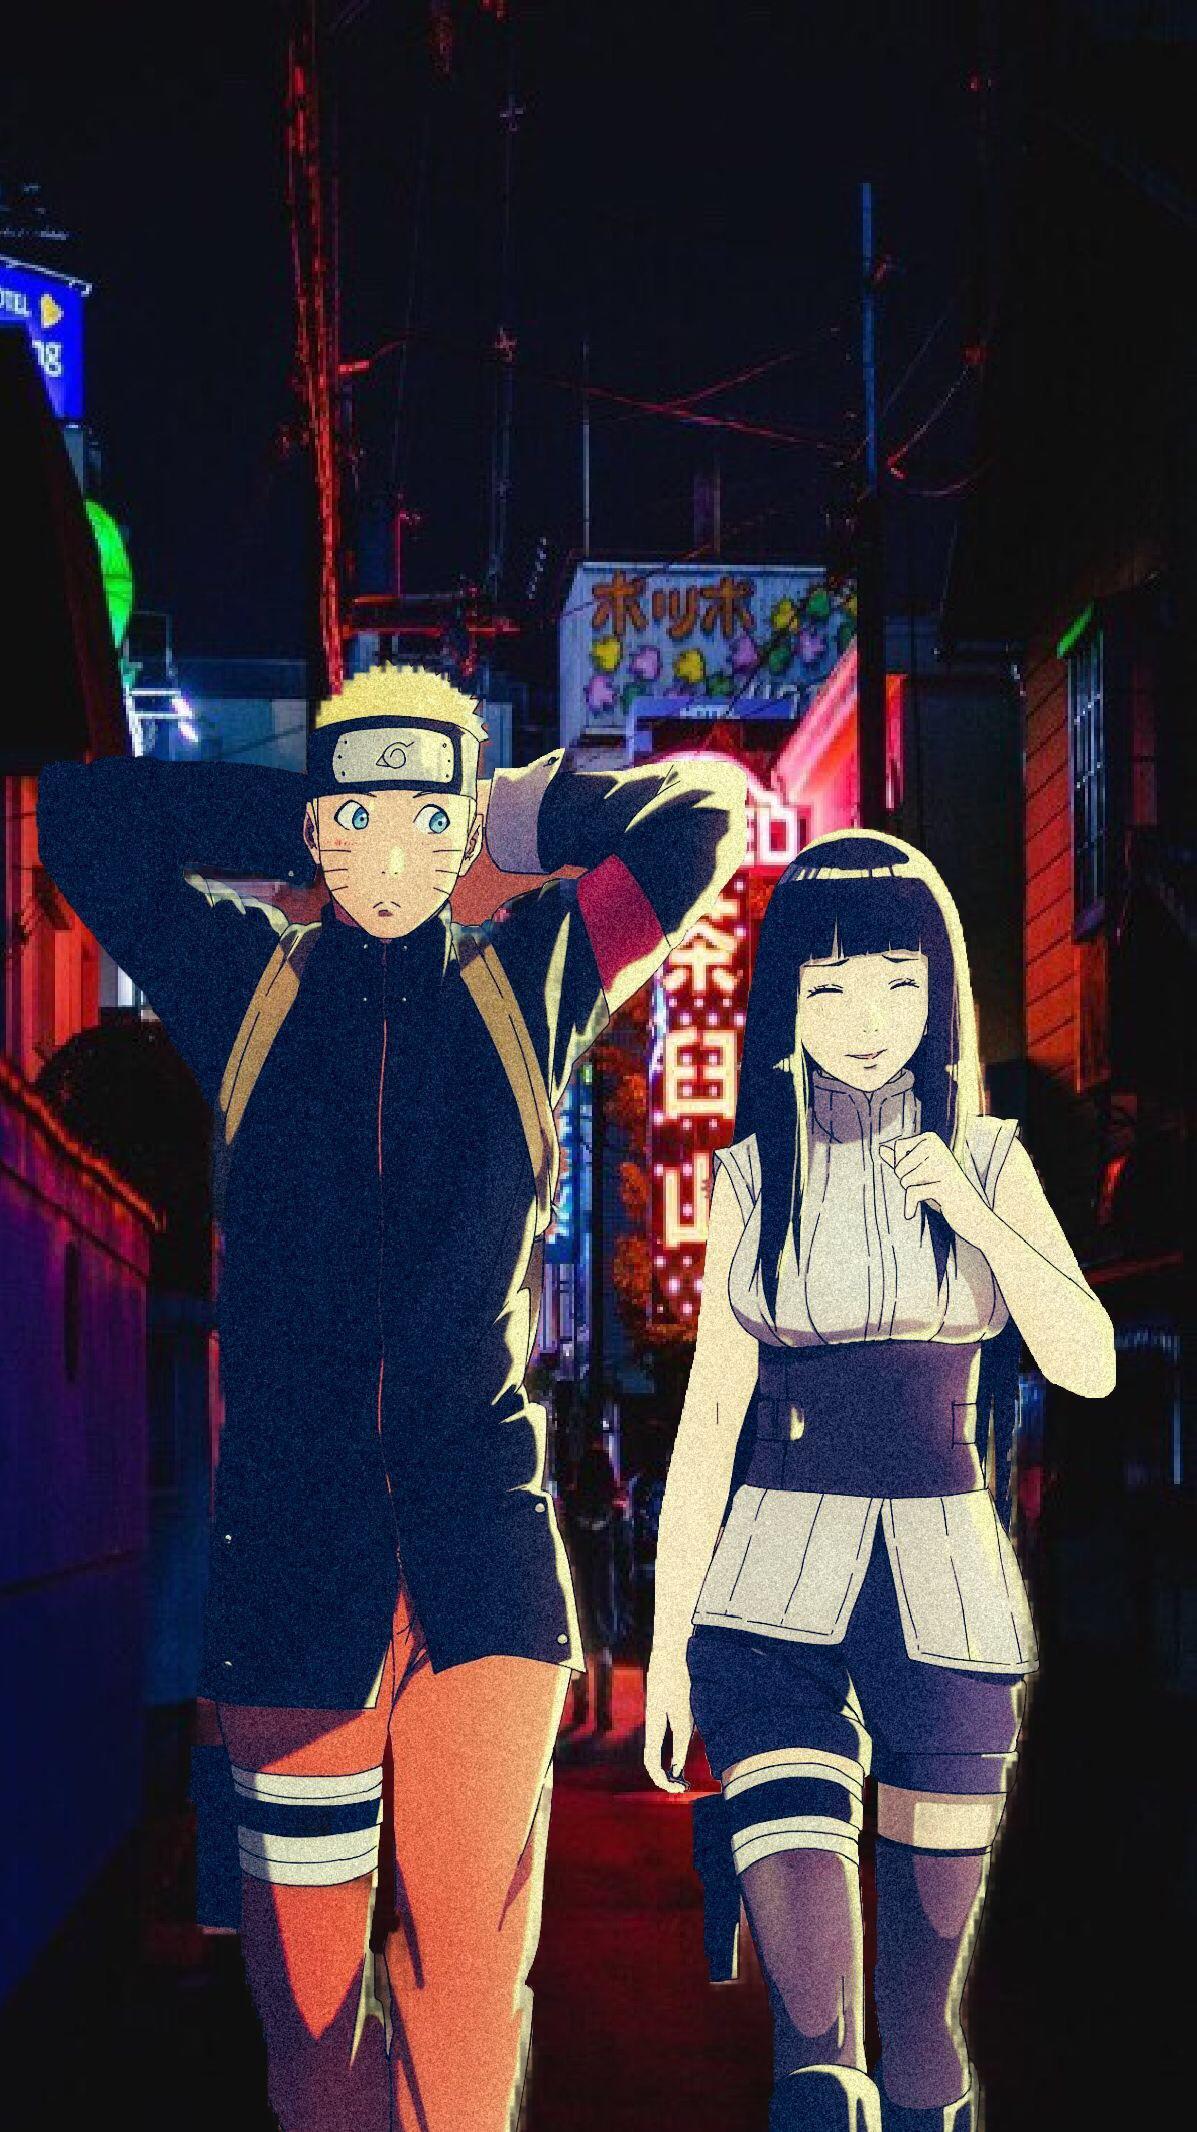 Made A Naruto Hinata Wallpaper On Photohop Fits For IPhone 6plus